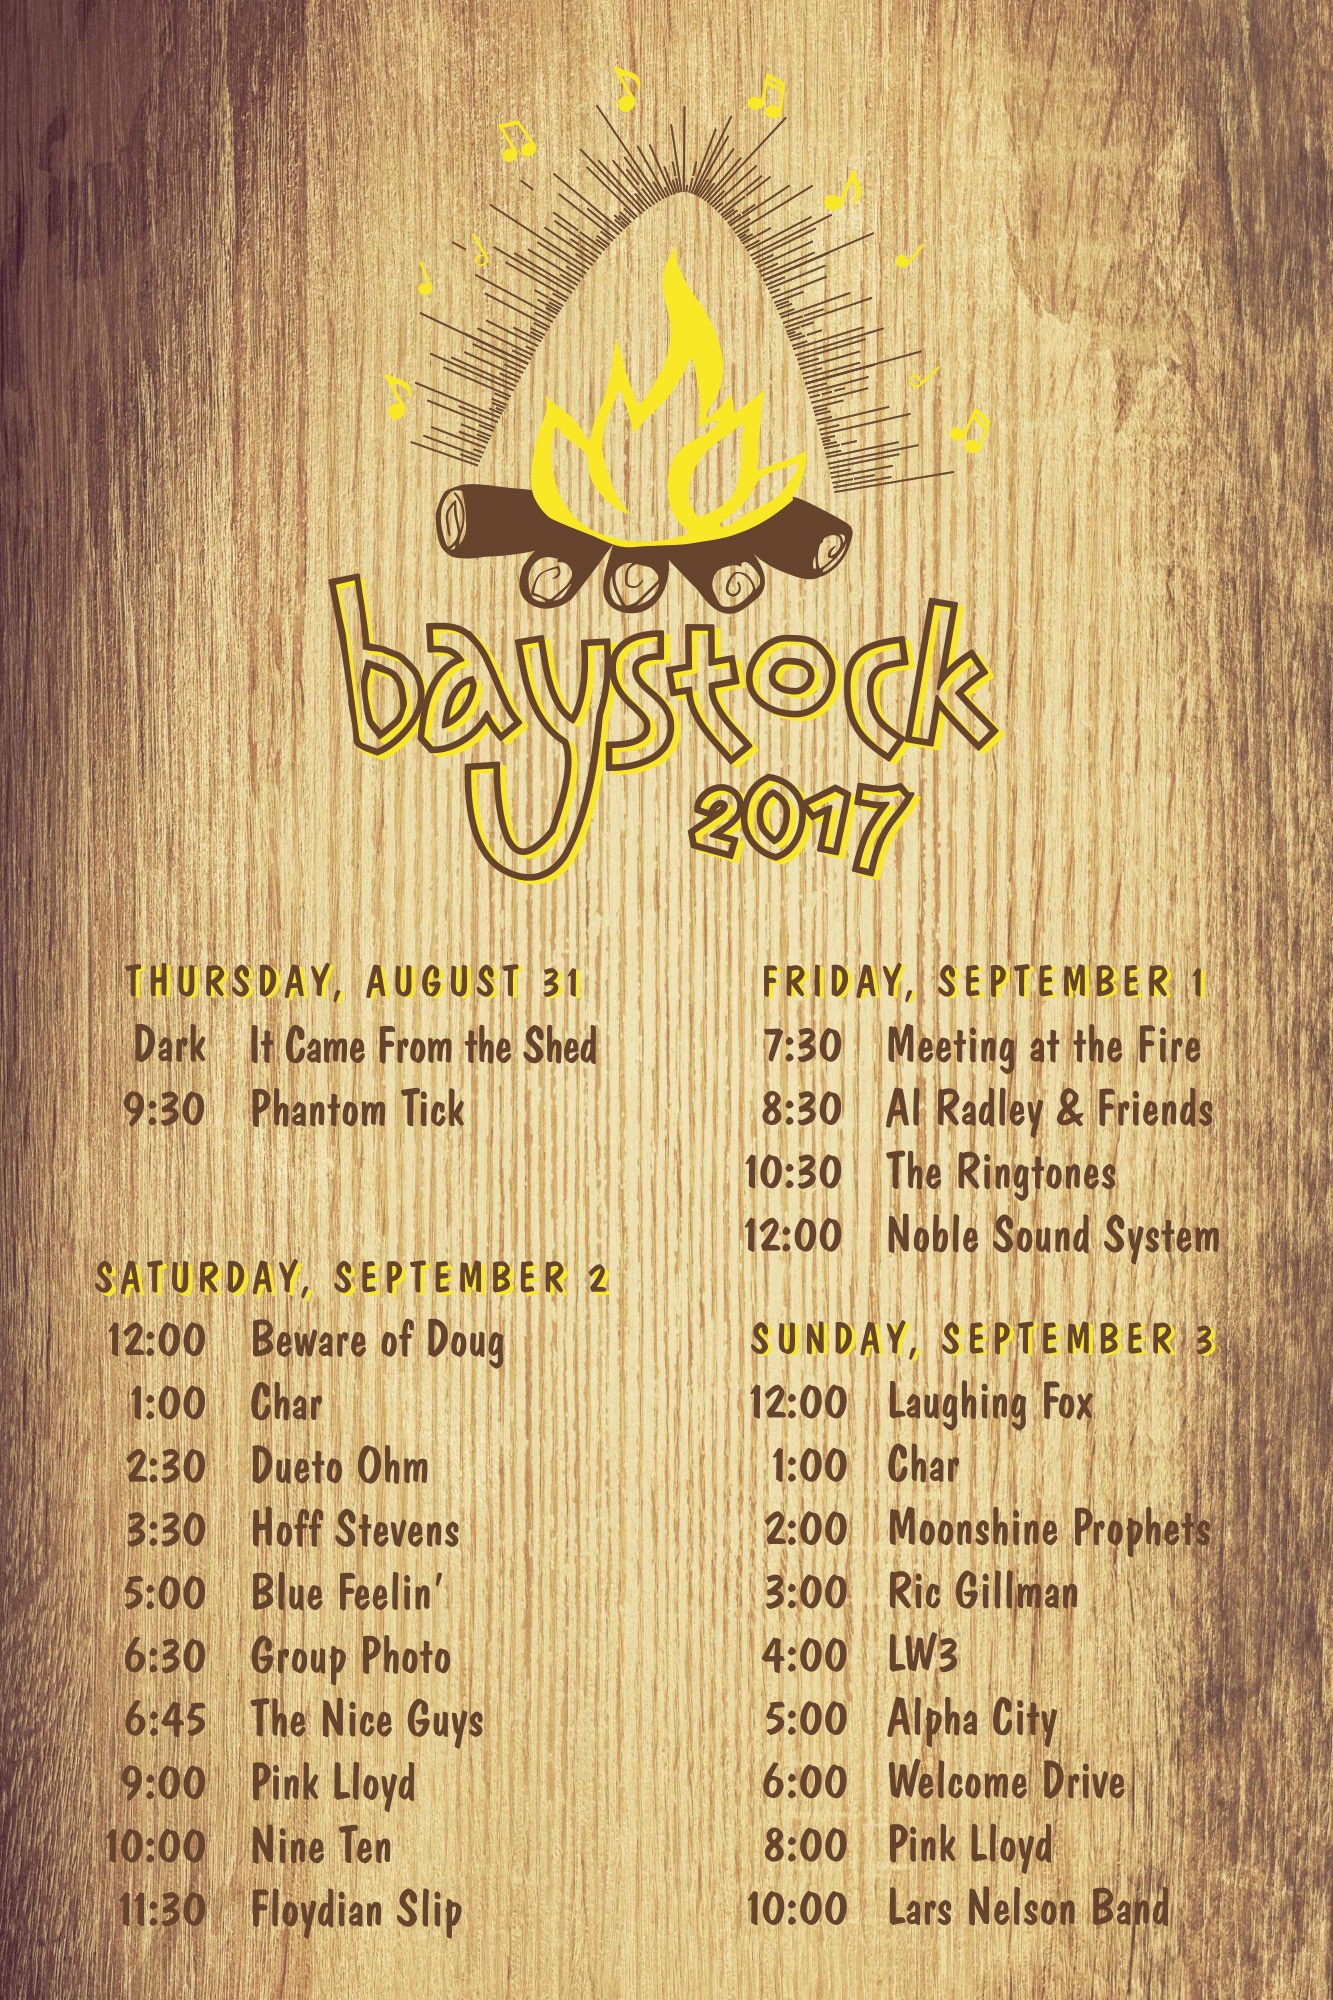 BAYSTOCK 2017 POSTERS